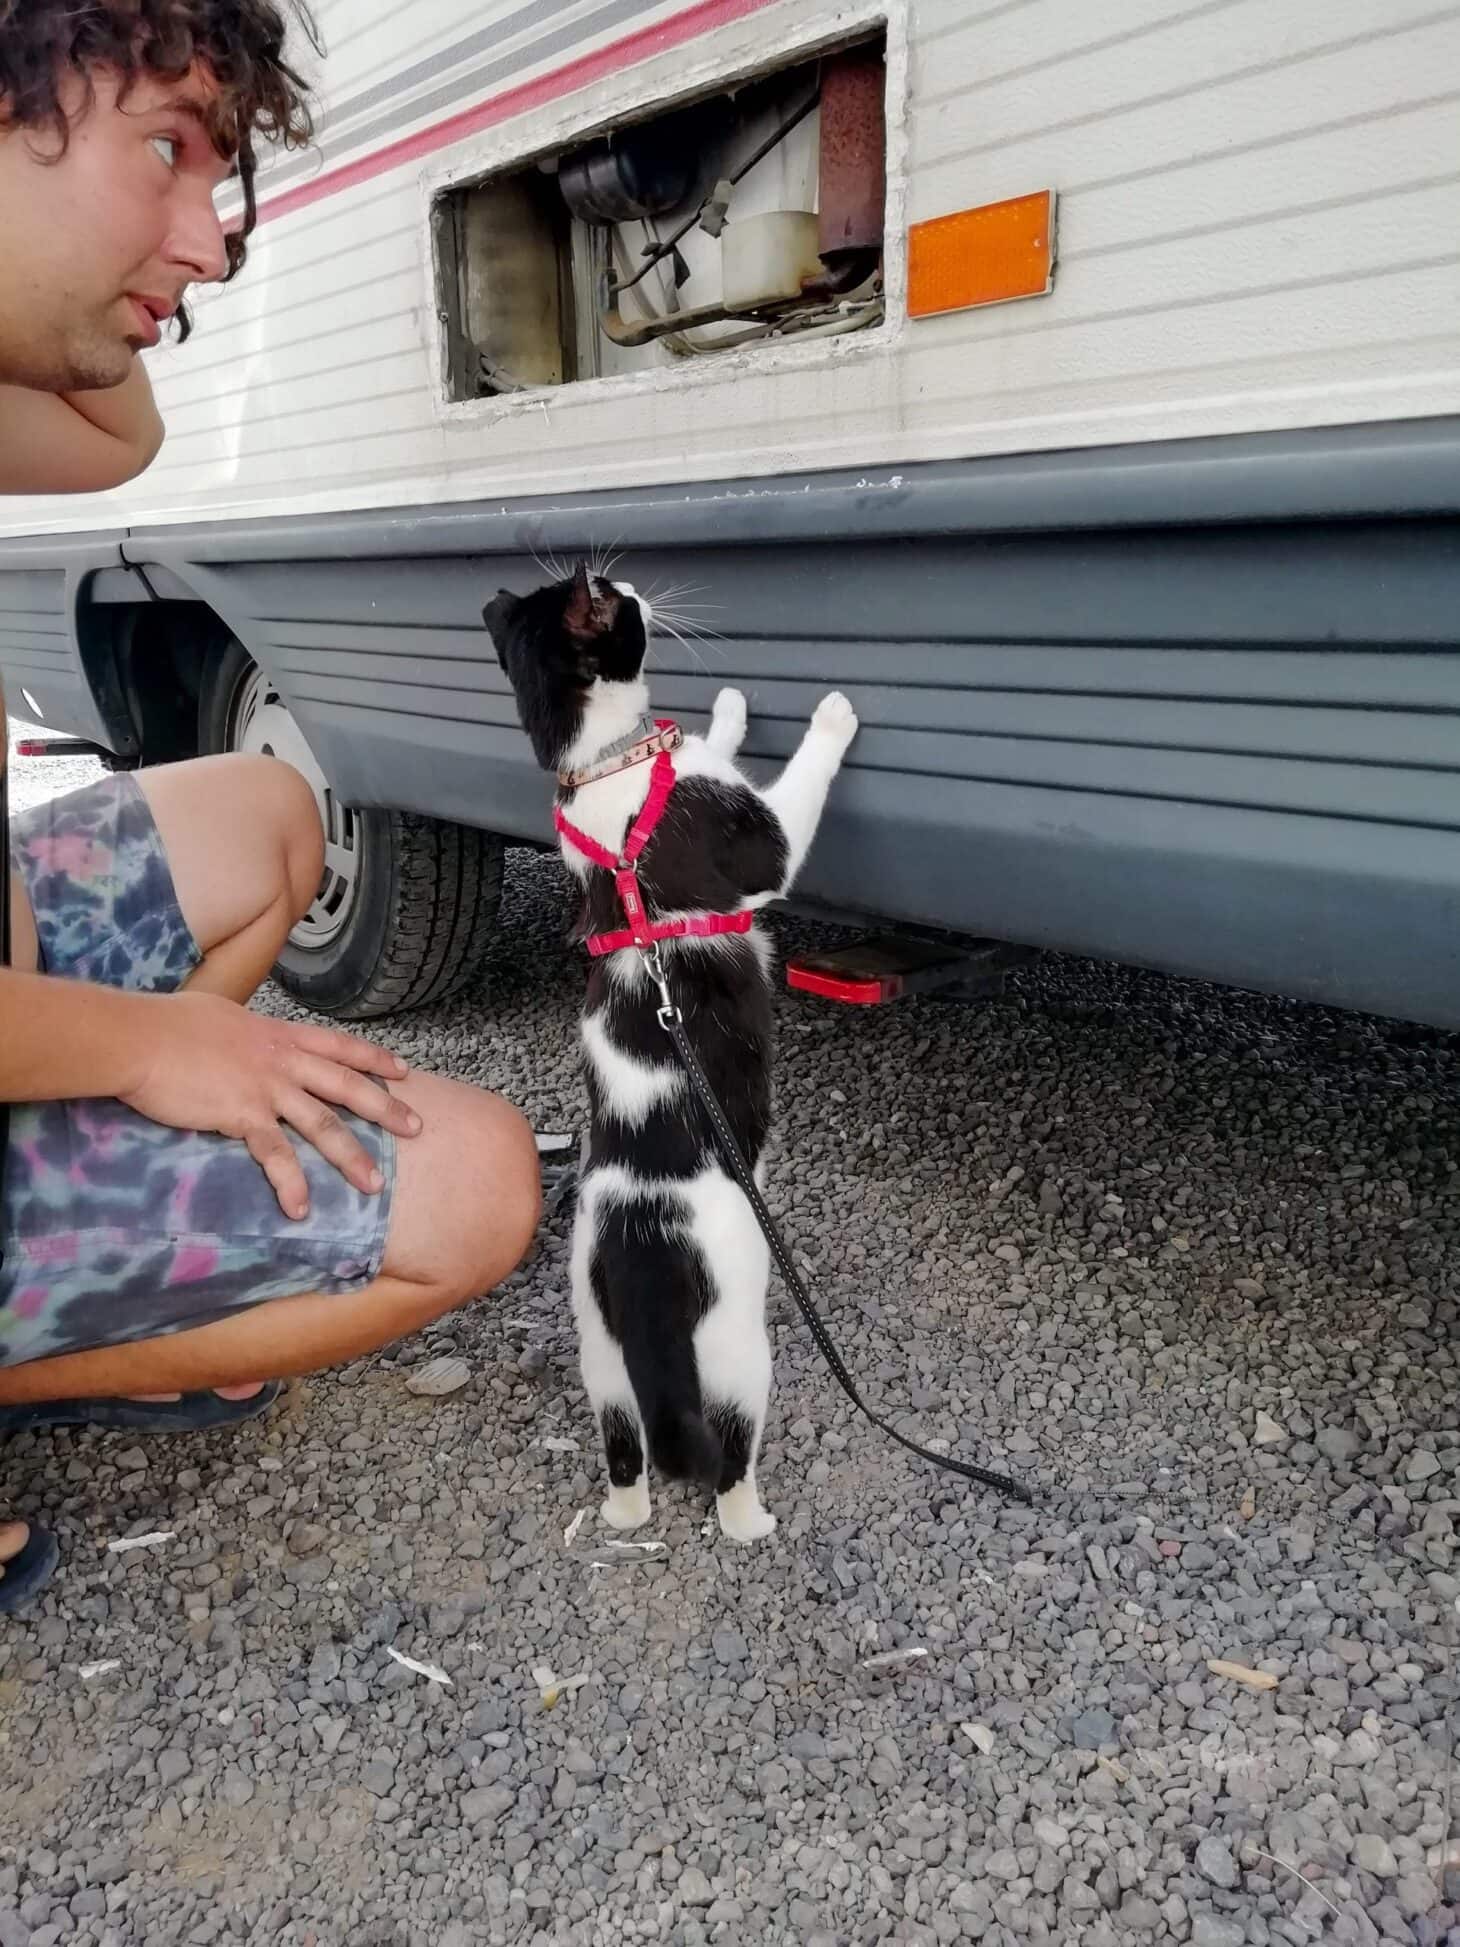 Man and cat inspecting the exterior of a three-way refrigerator on an RV.